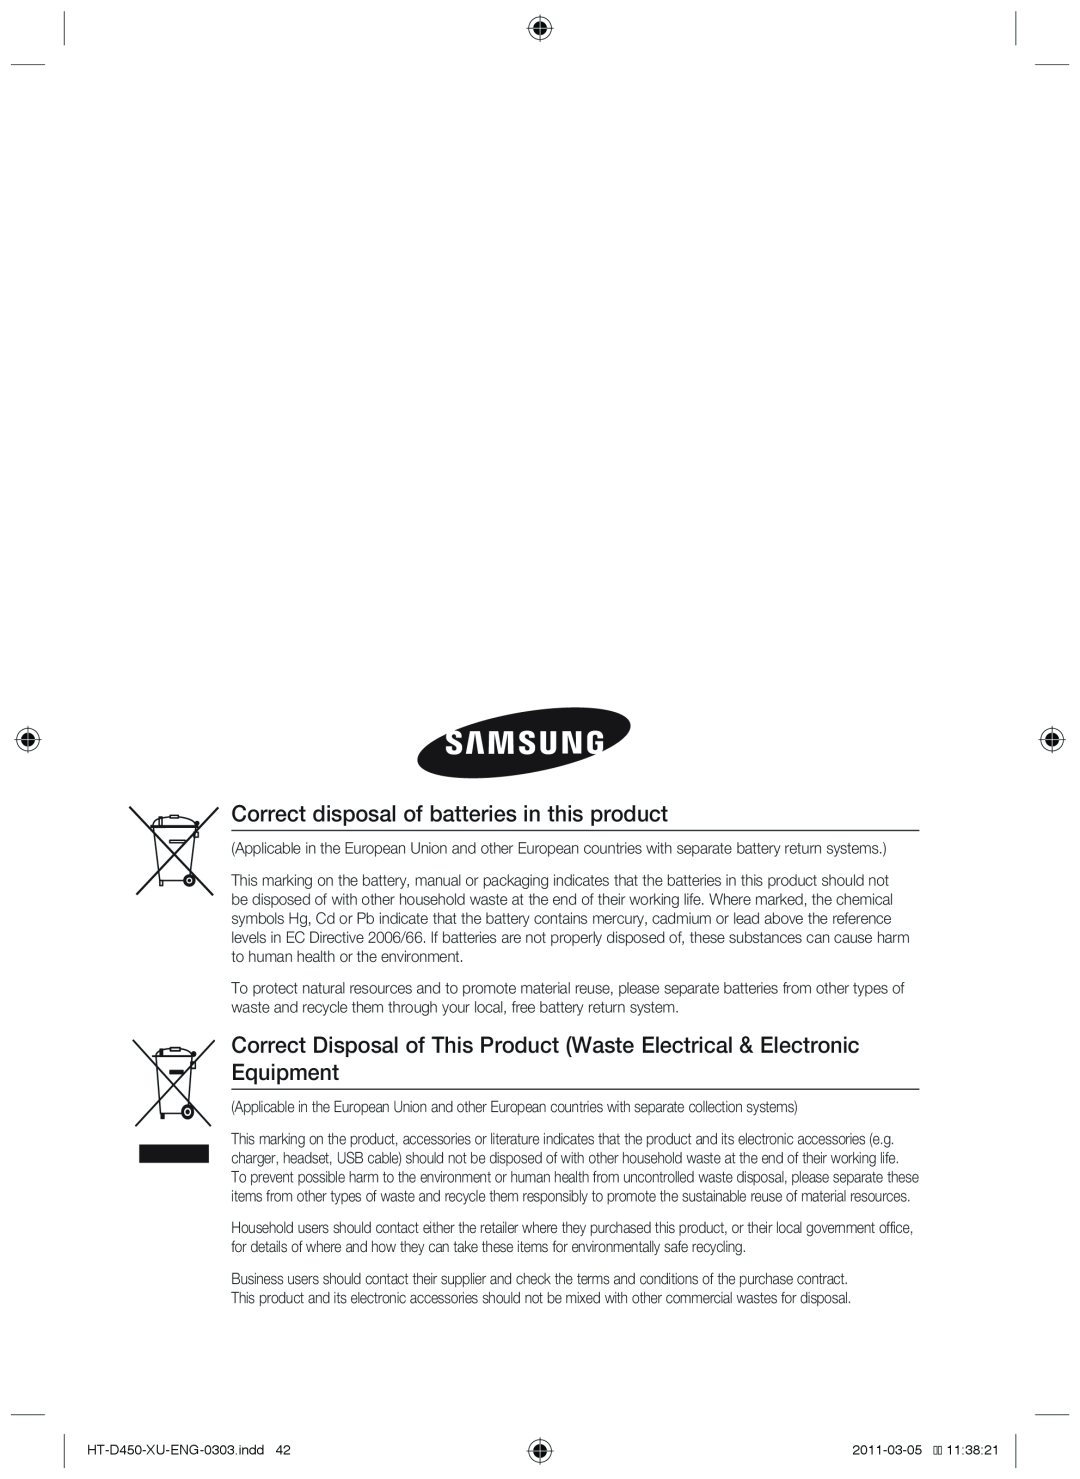 Samsung HT-D450, HT-D455, HT-D453 user manual Correct disposal of batteries in this product, Code No. AH68-02259B 